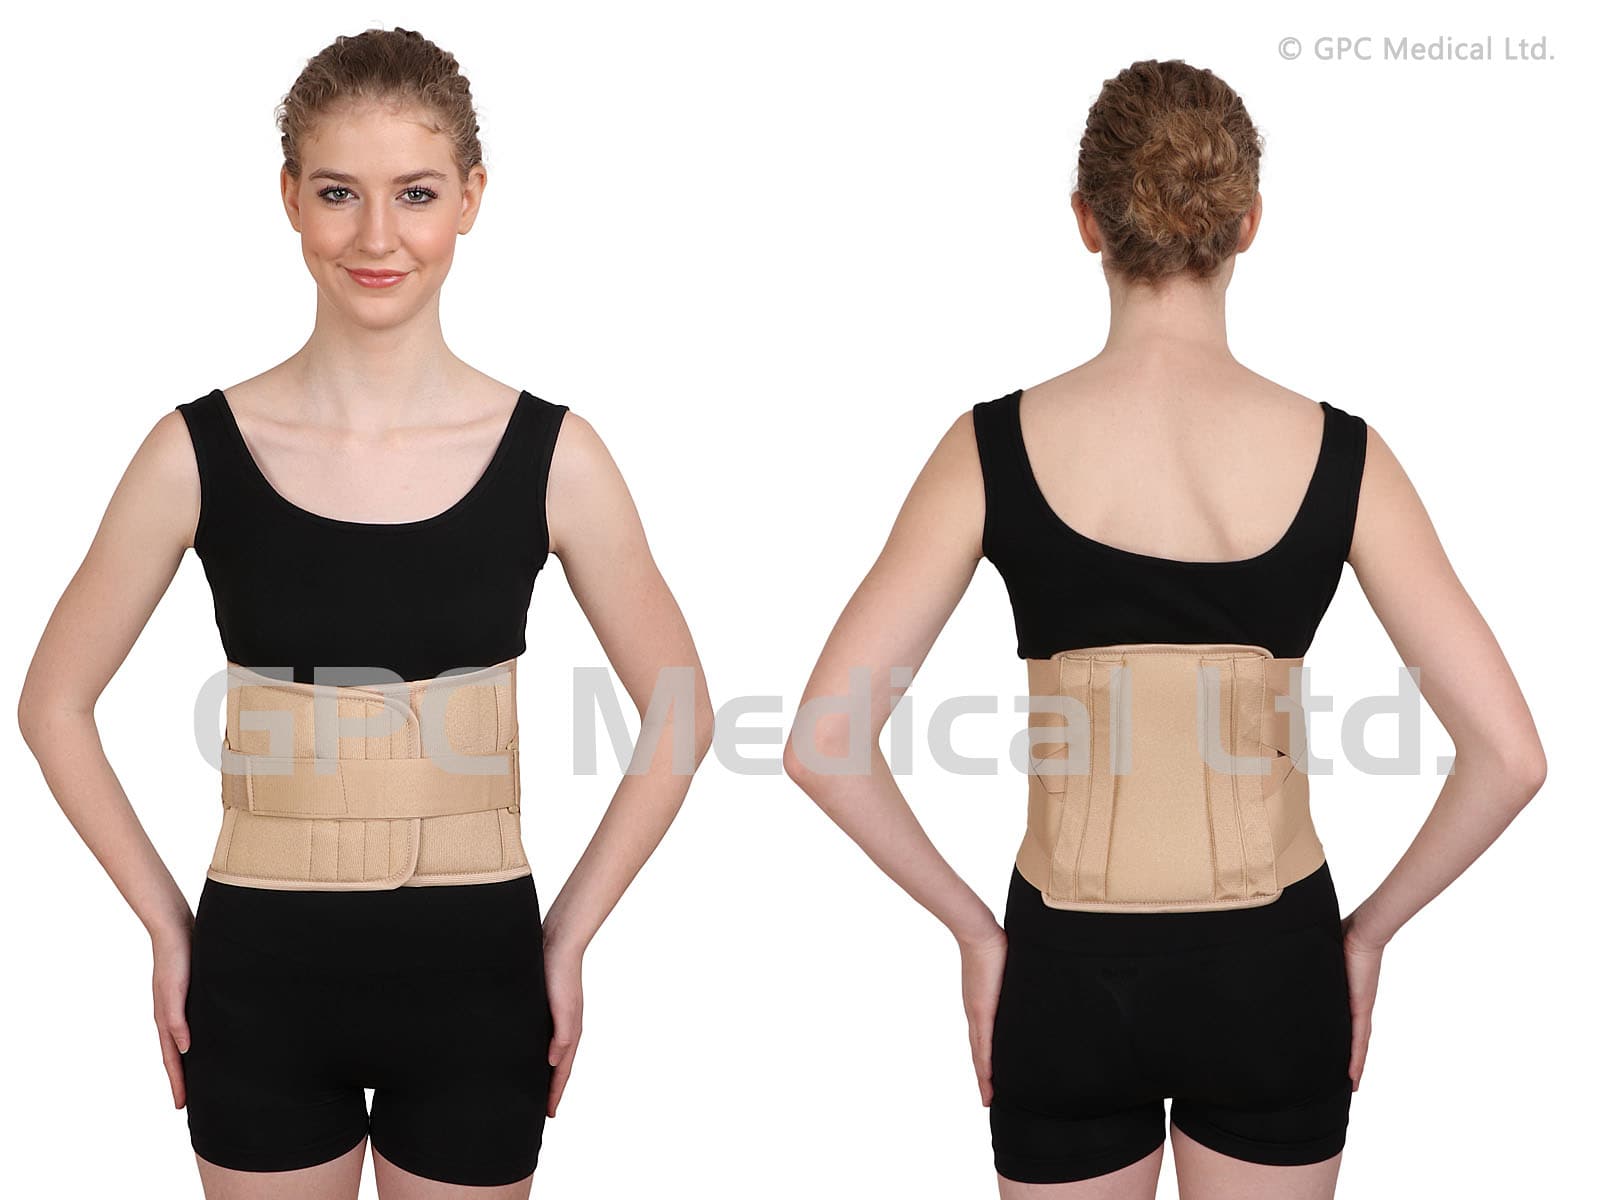 Lumbo Sacral Spinal Support with Cushion